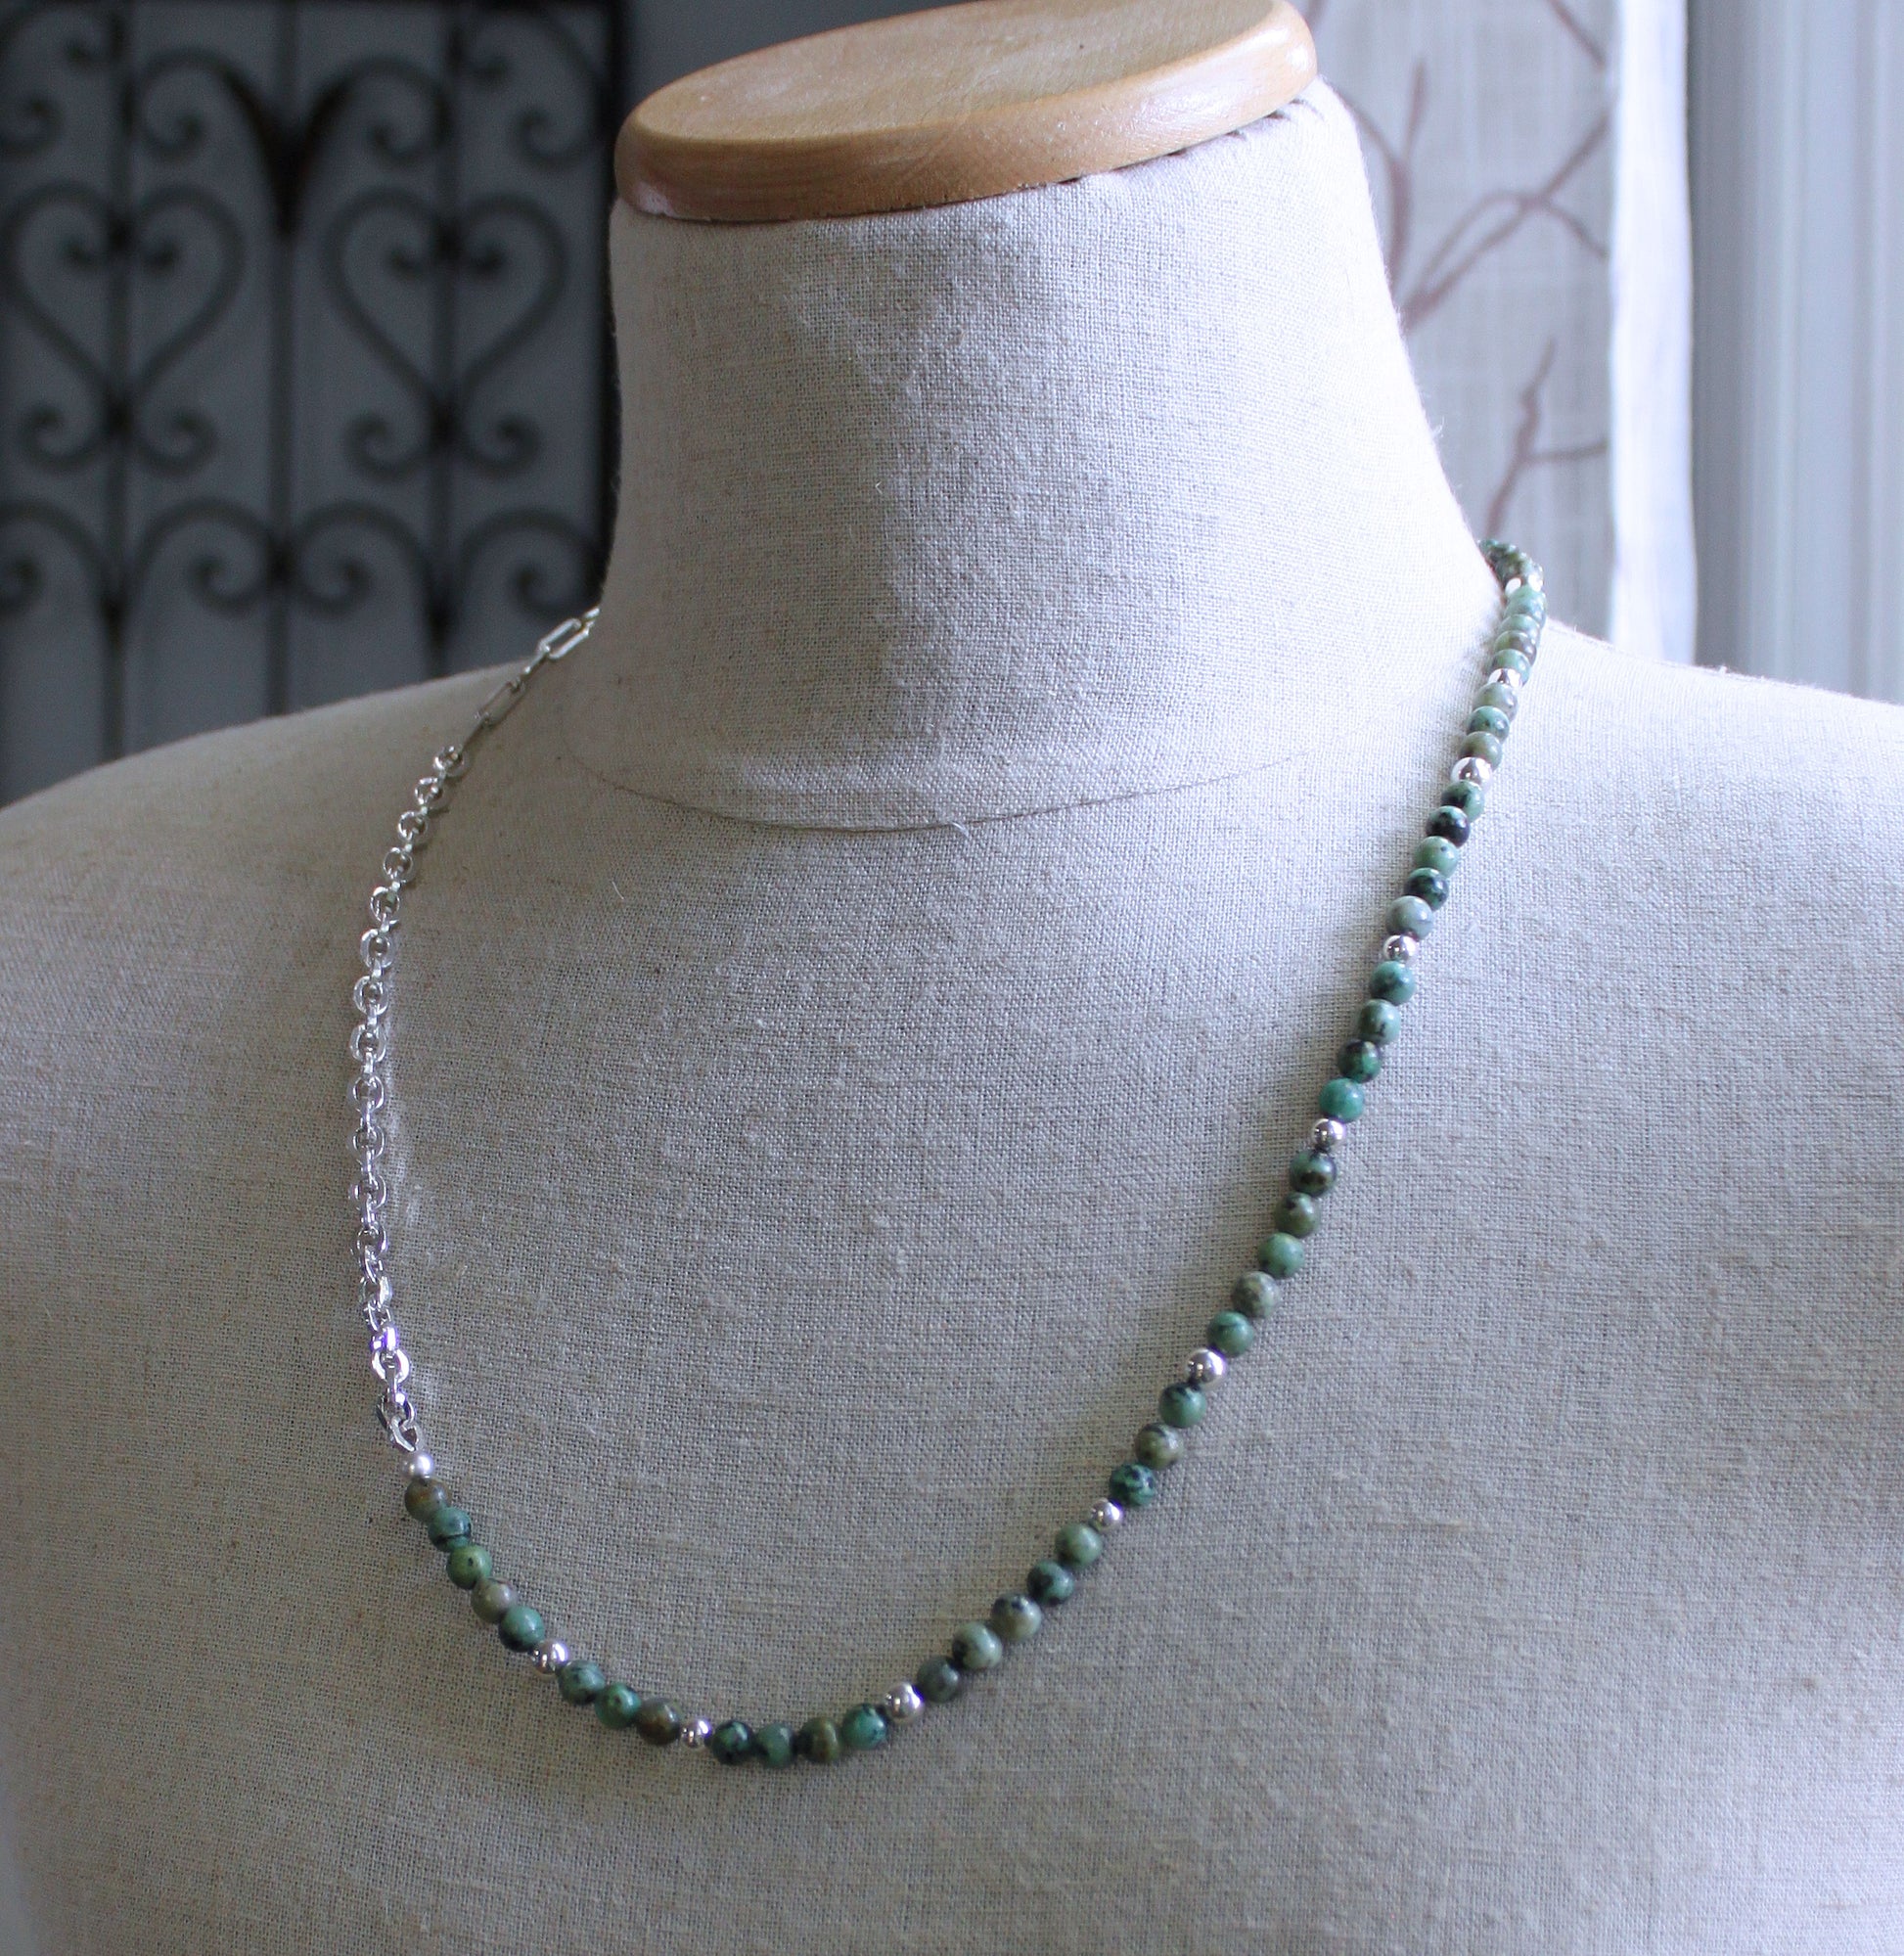 Men's Hybrid Bead and Chain Necklace